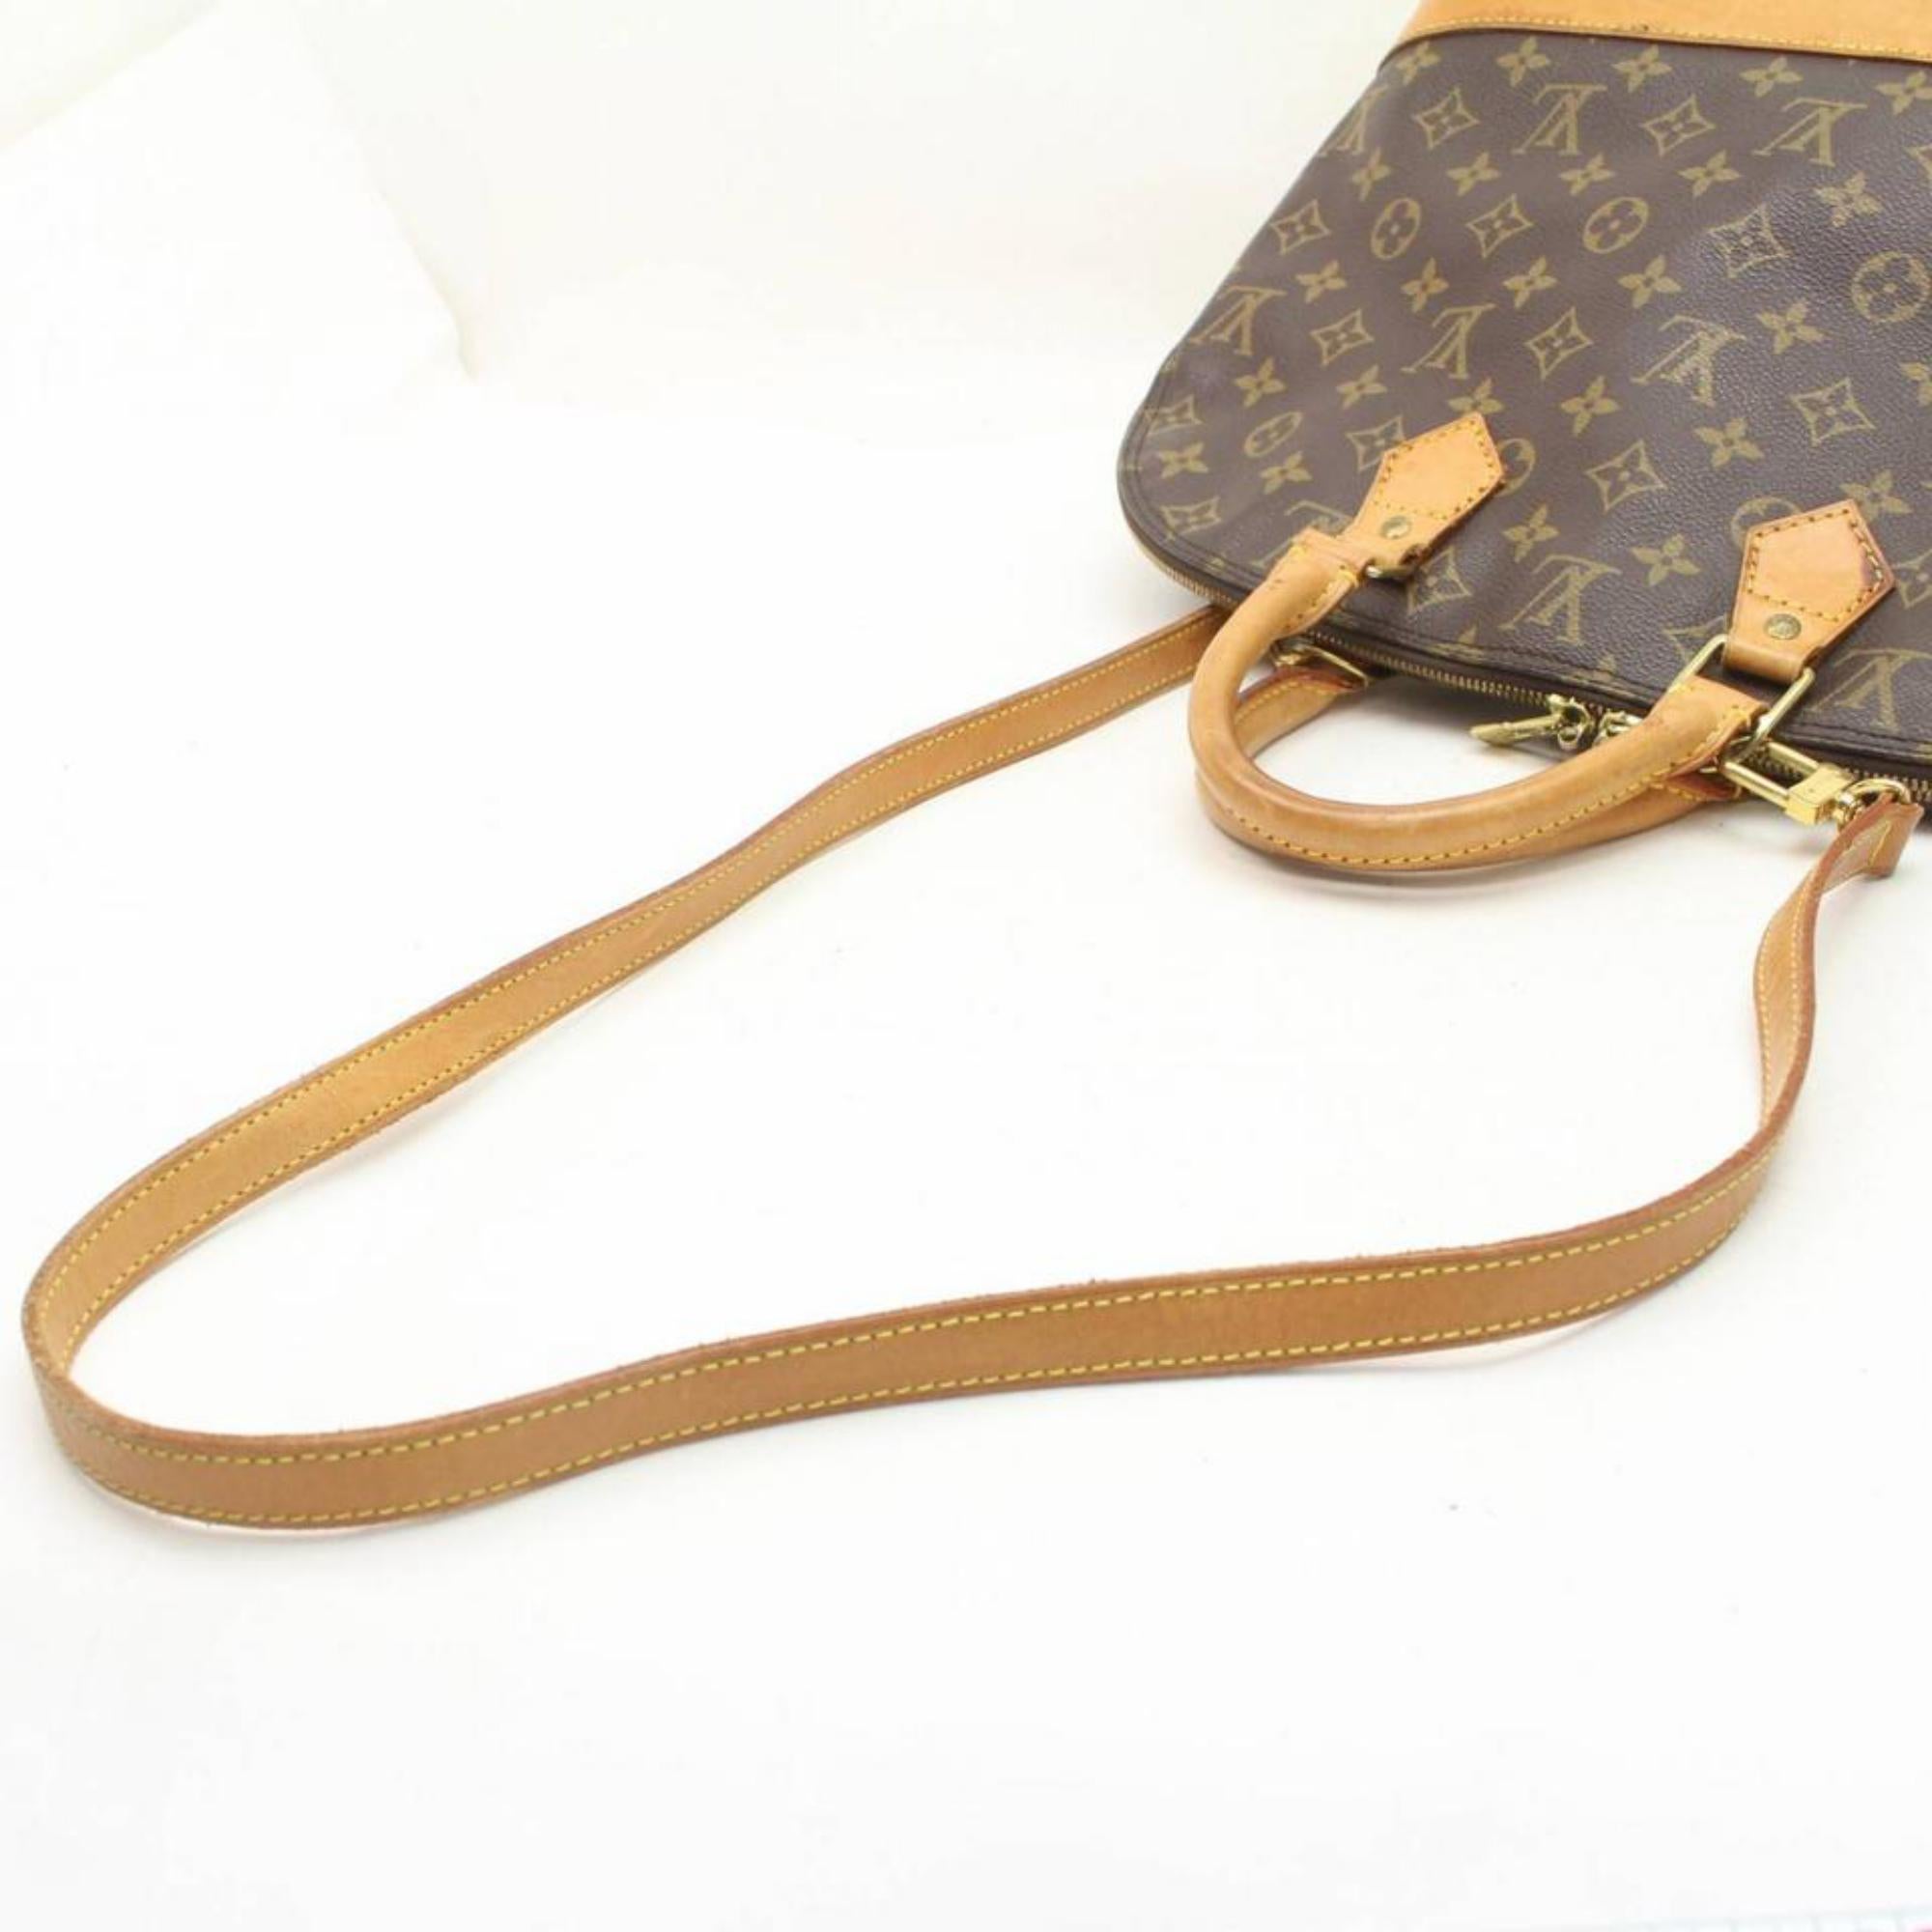 Louis Vuitton Alma Monogram with Strap 869415 Brown Coated Canvas Shoulder Bag In Good Condition For Sale In Forest Hills, NY